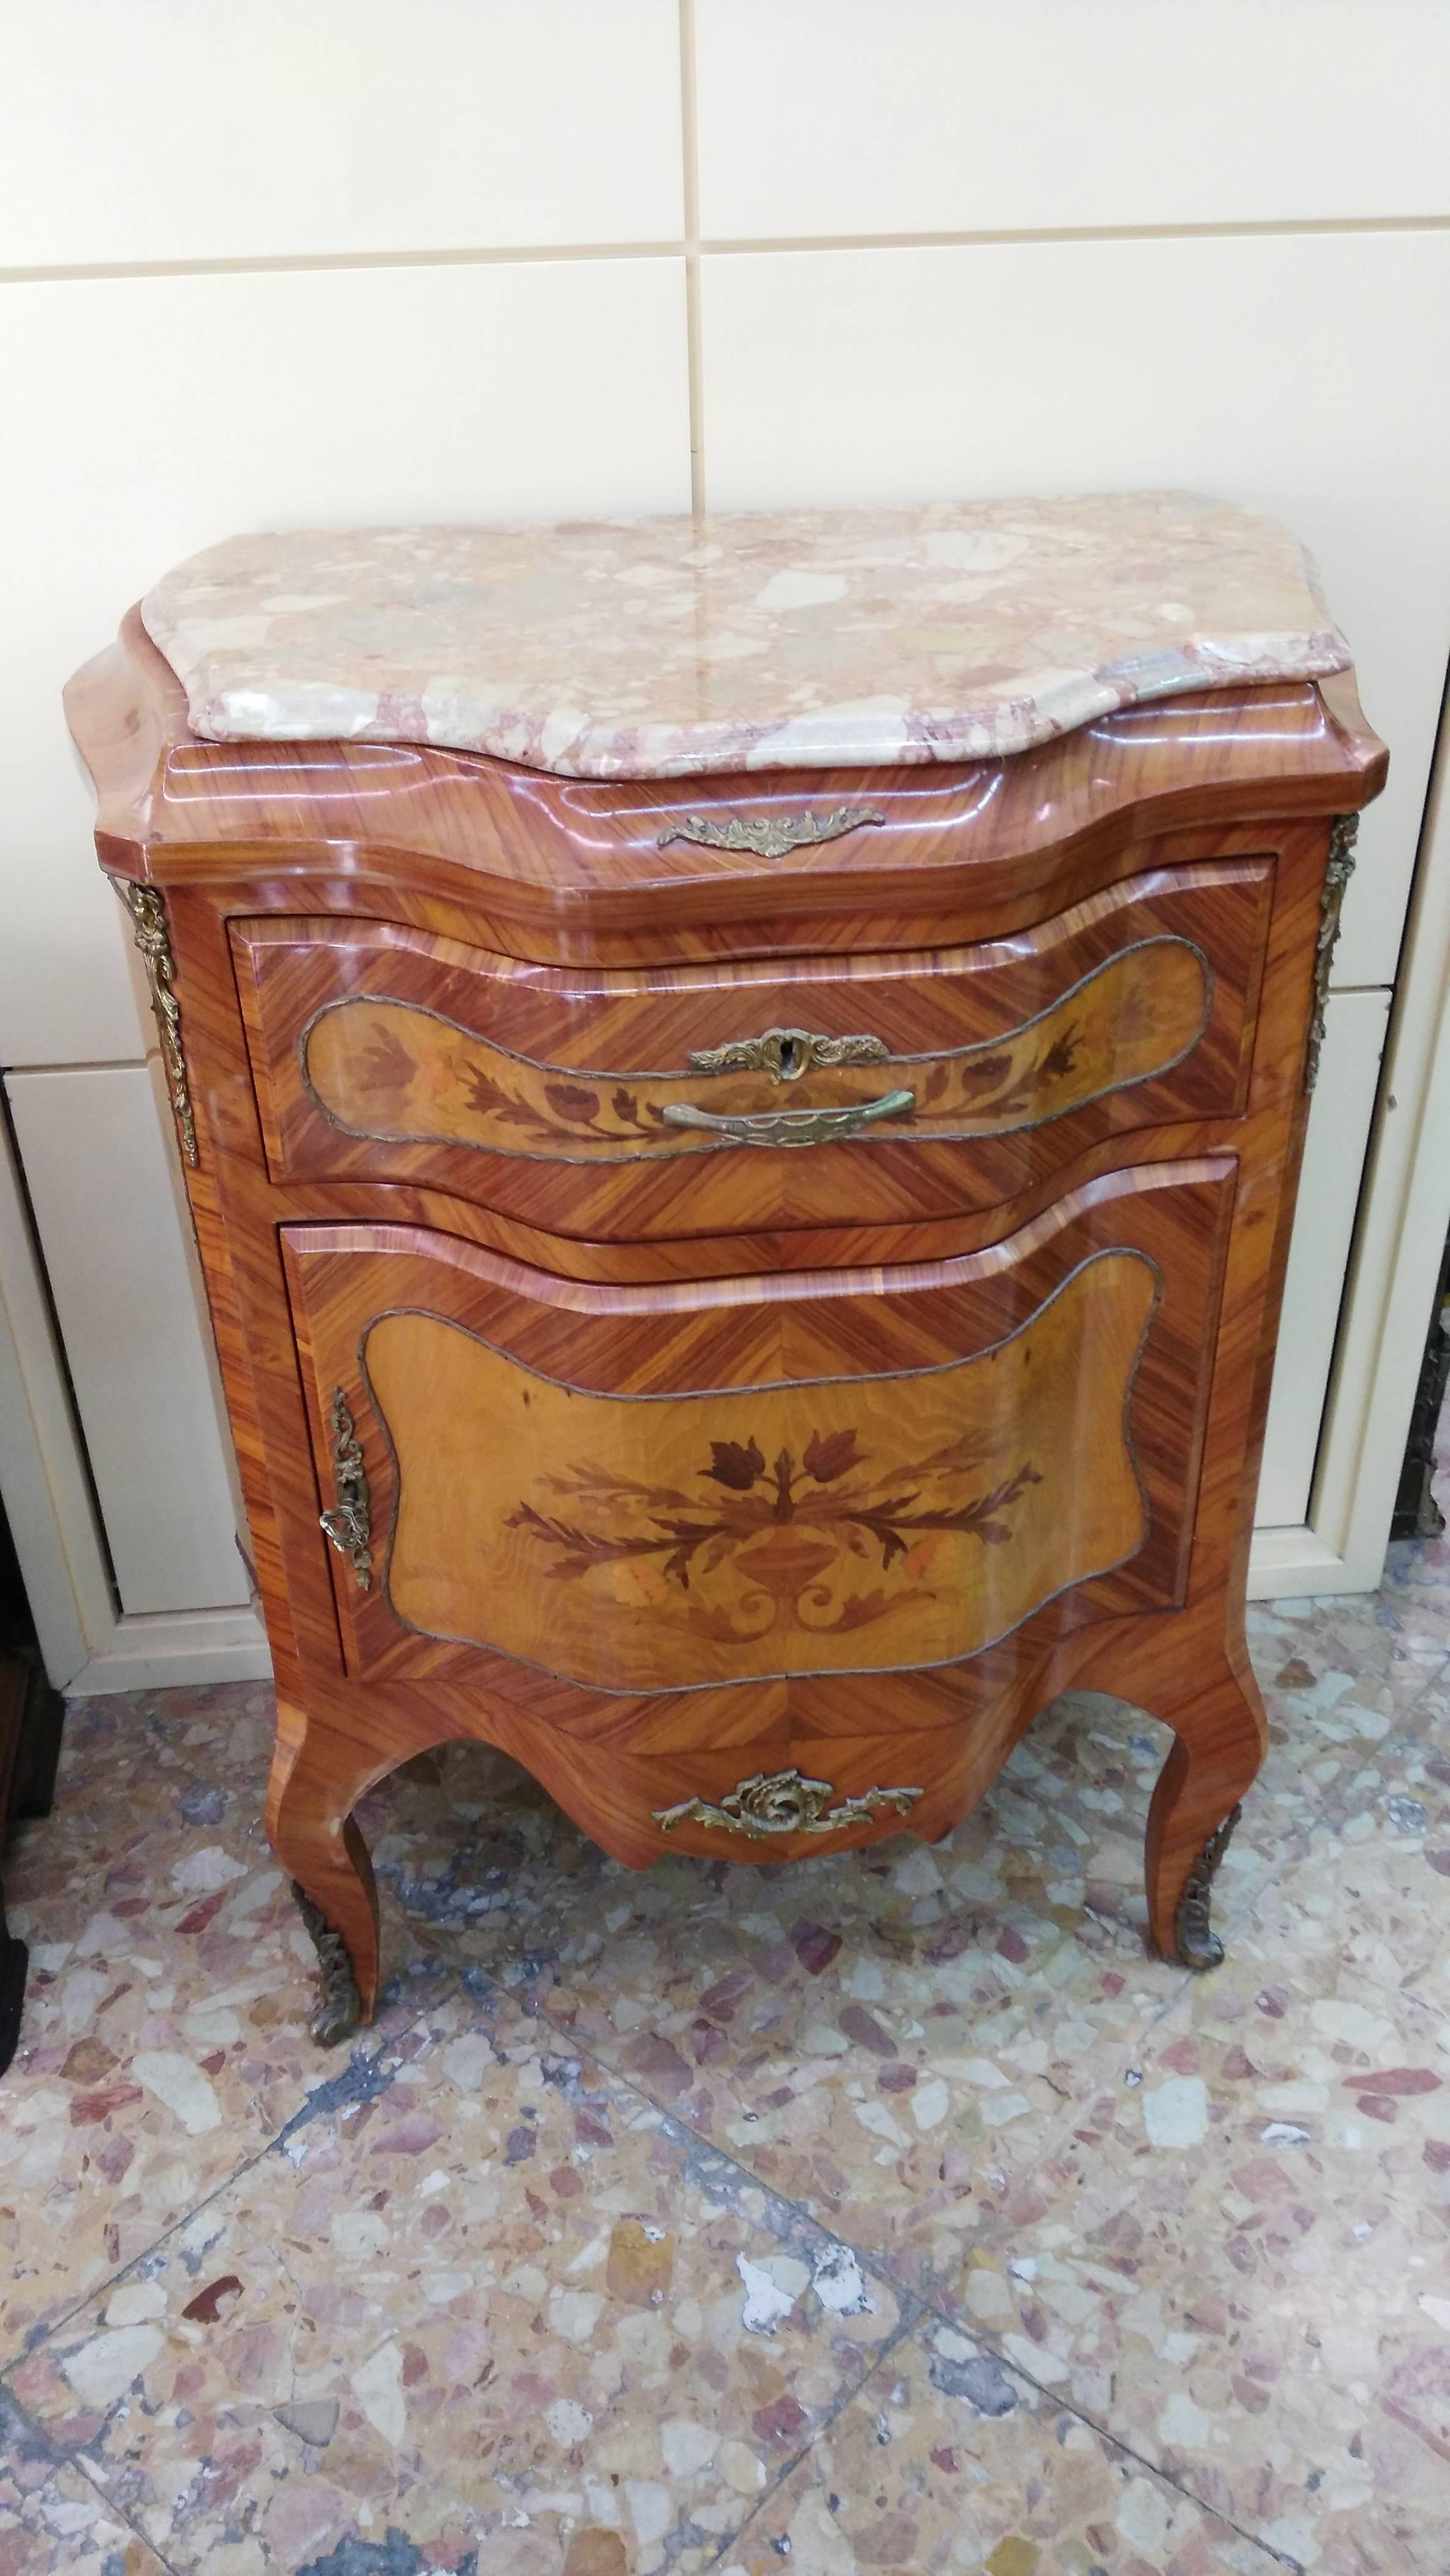 Veneered in various woods, with applications in gilded bronze, front with a central door embellished with embossed relief in golden metal, marble top.